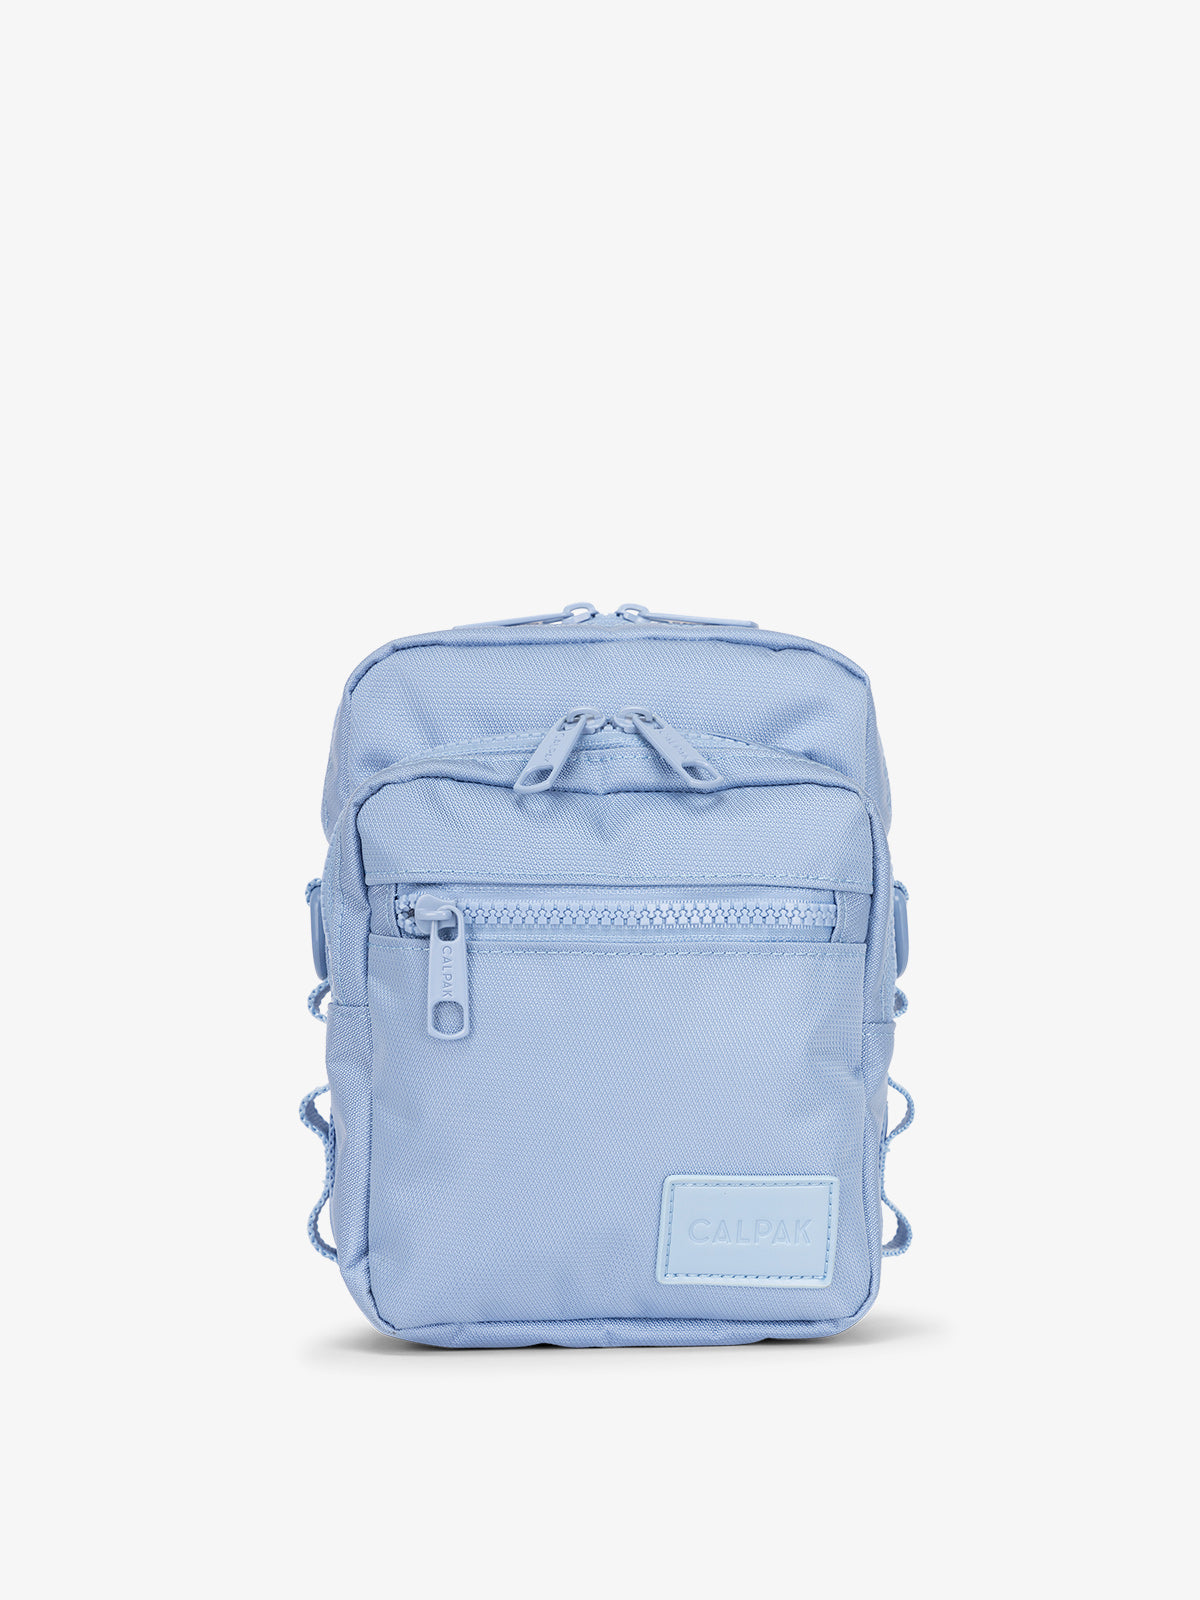 Front-view of CALPAK Stevyn Mini Crossbody Bag with zippered pockets and side panel daisy chains in sky blue